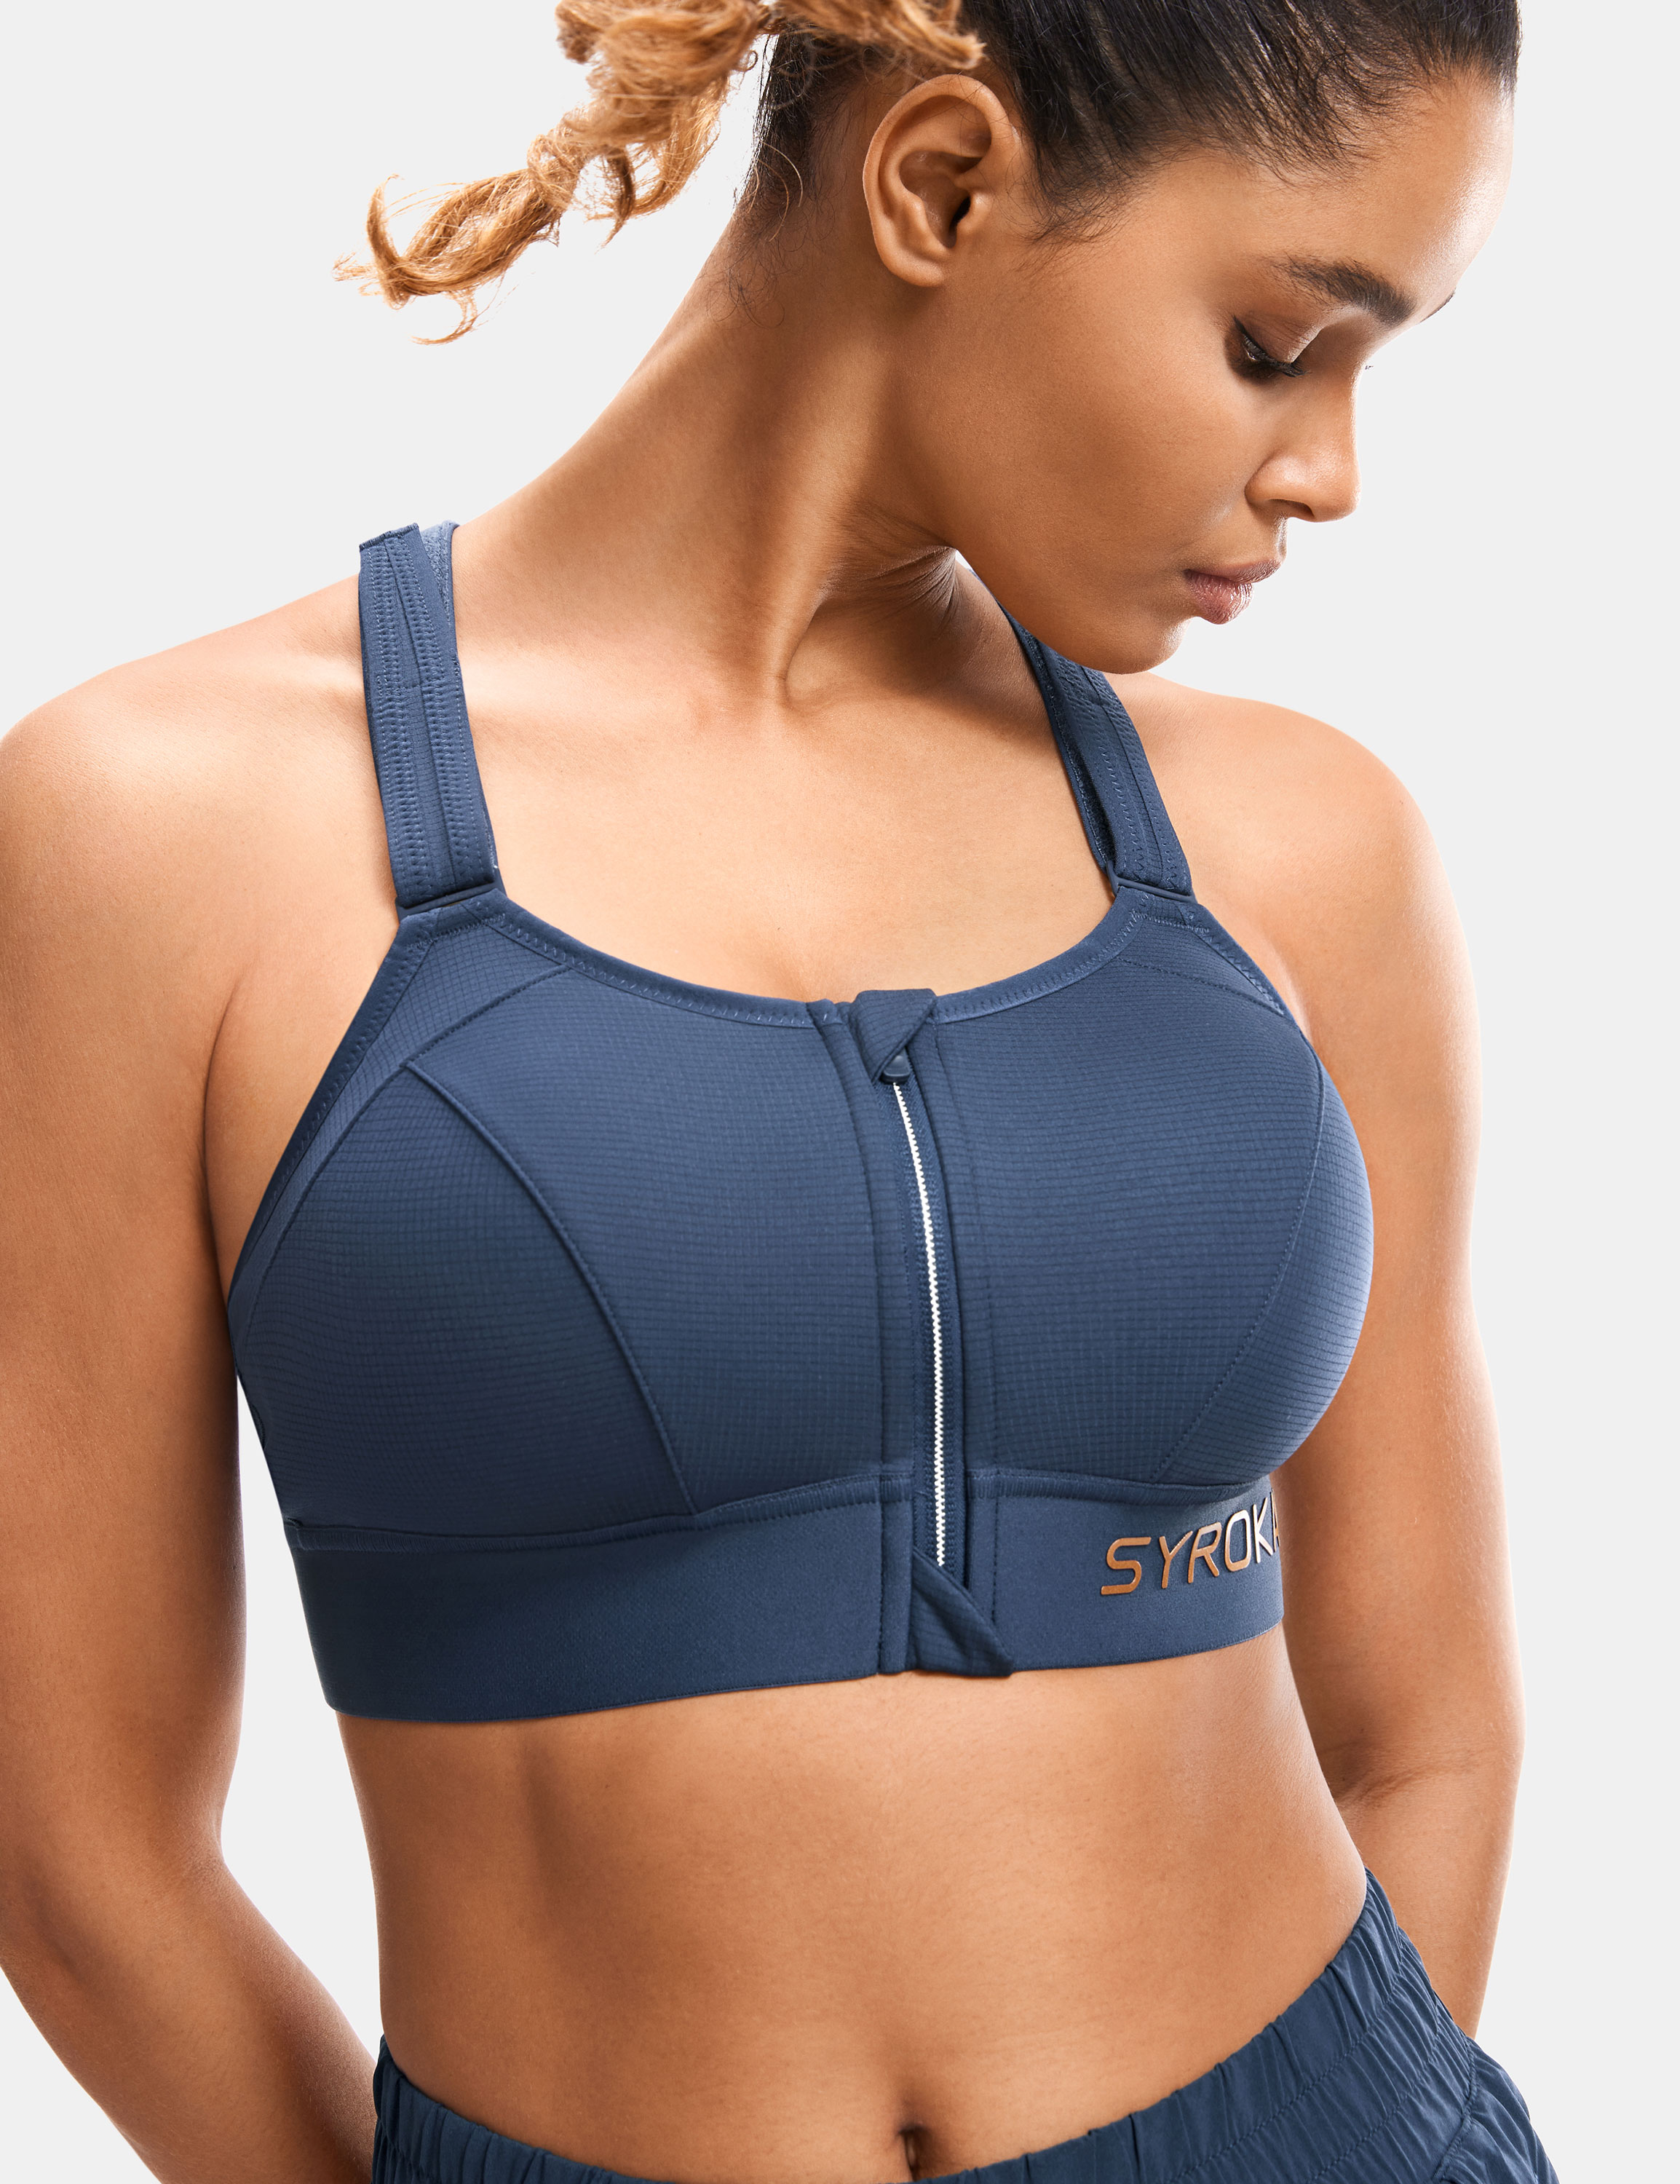 SYROKAN Women's High Impact Front Zip Wirefree Supportive Sports Bra